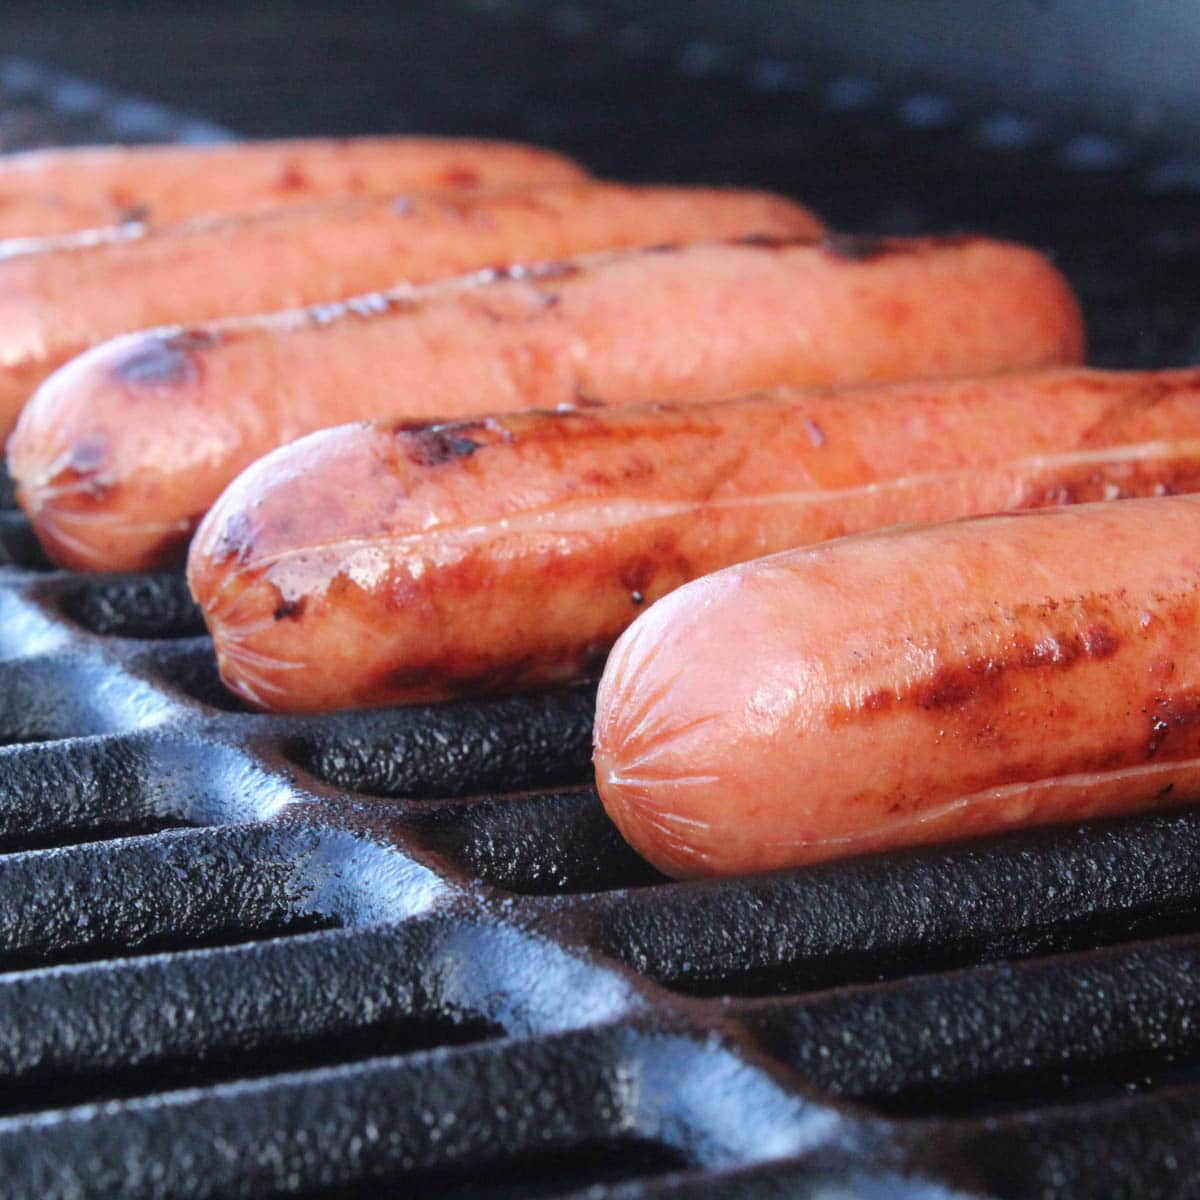 How To Tell When Hot Dogs Are Done - Easy Tips - Simple Grill Recipes